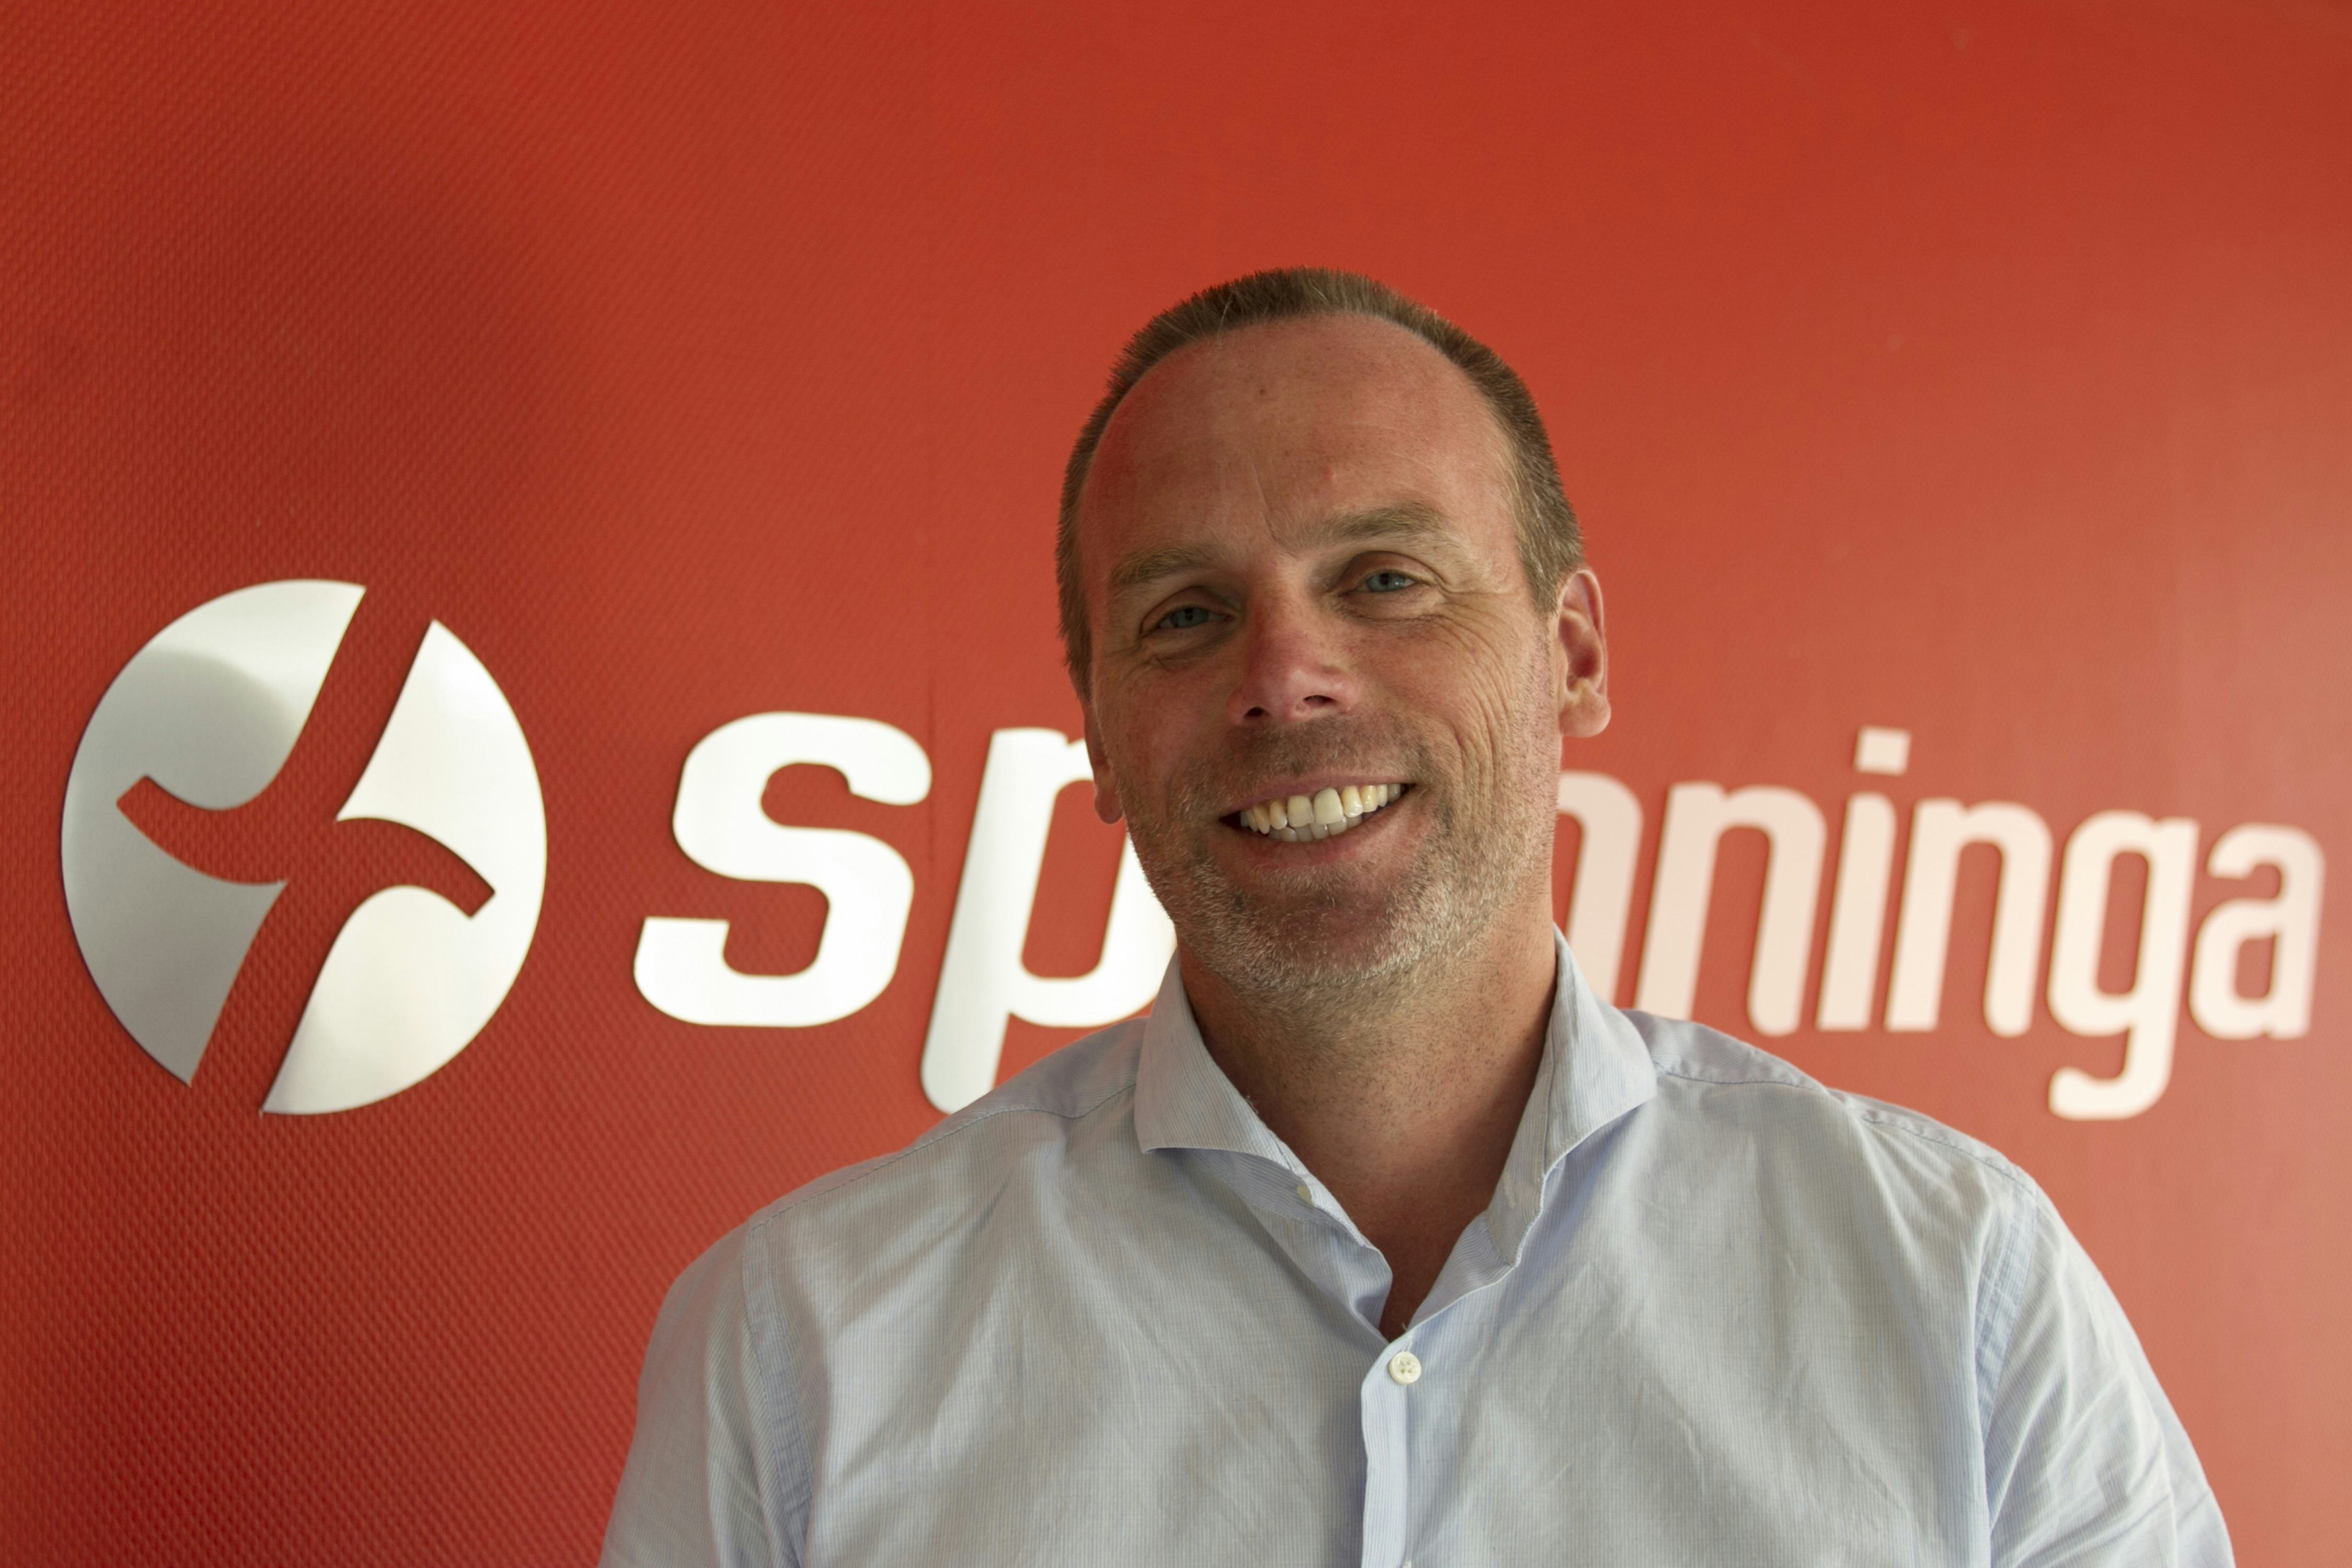 Kees Brouwer is appointed Managing Director of the Spanninga Group. – Photo Spanninga